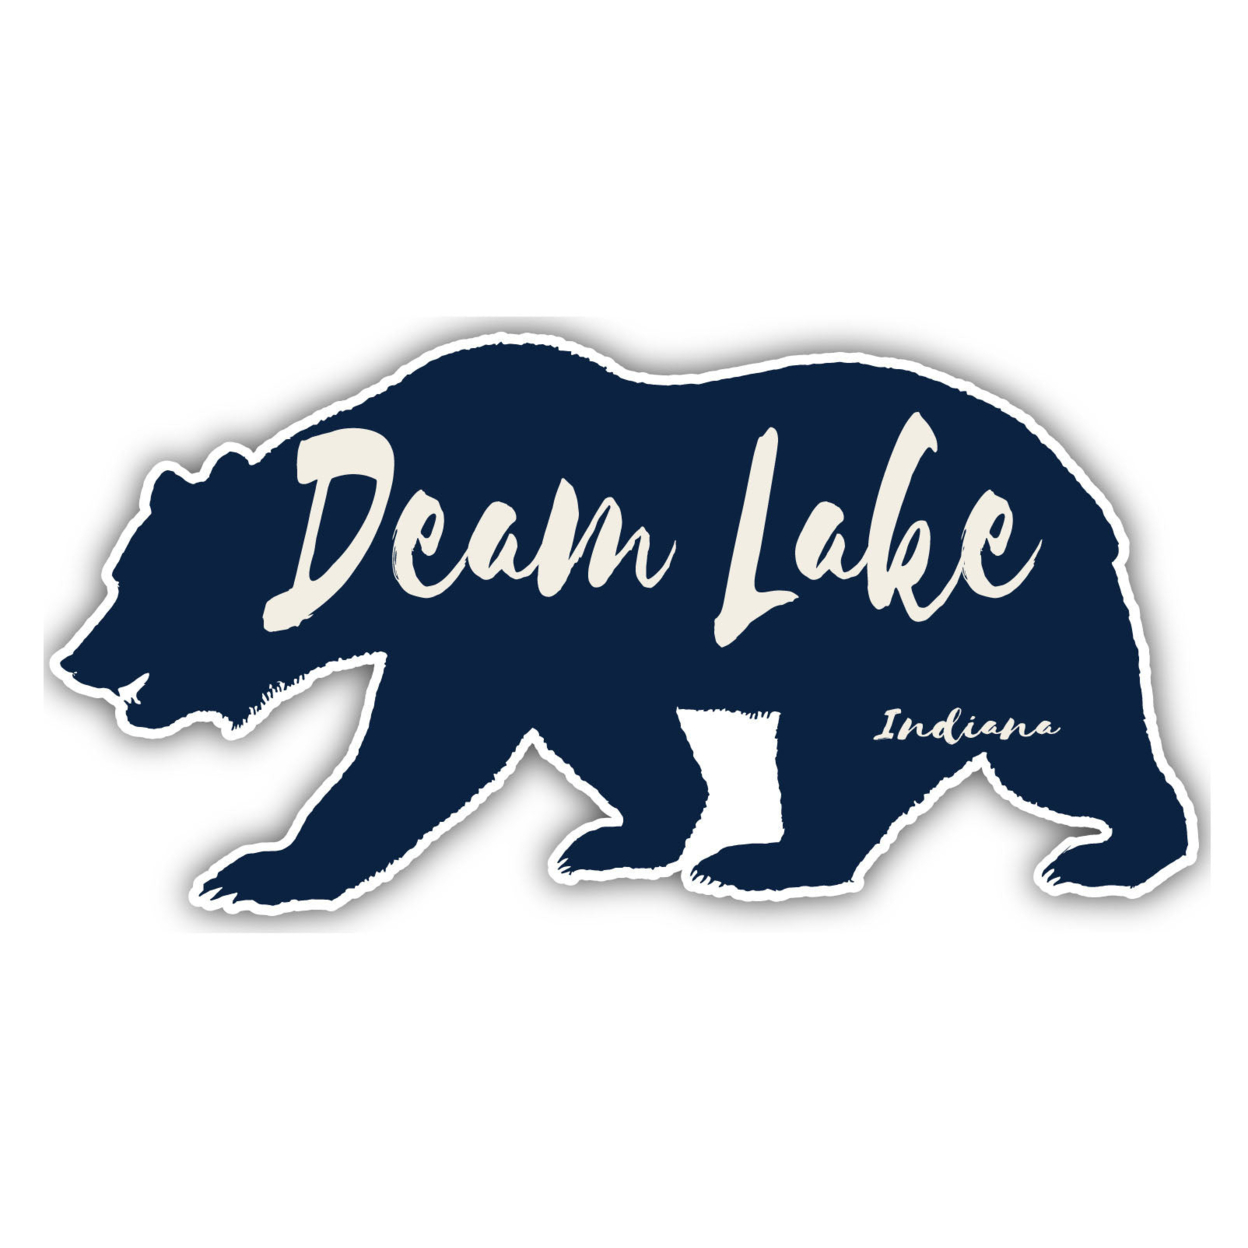 Deam Lake Indiana Souvenir Decorative Stickers (Choose Theme And Size) - 4-Pack, 2-Inch, Bear